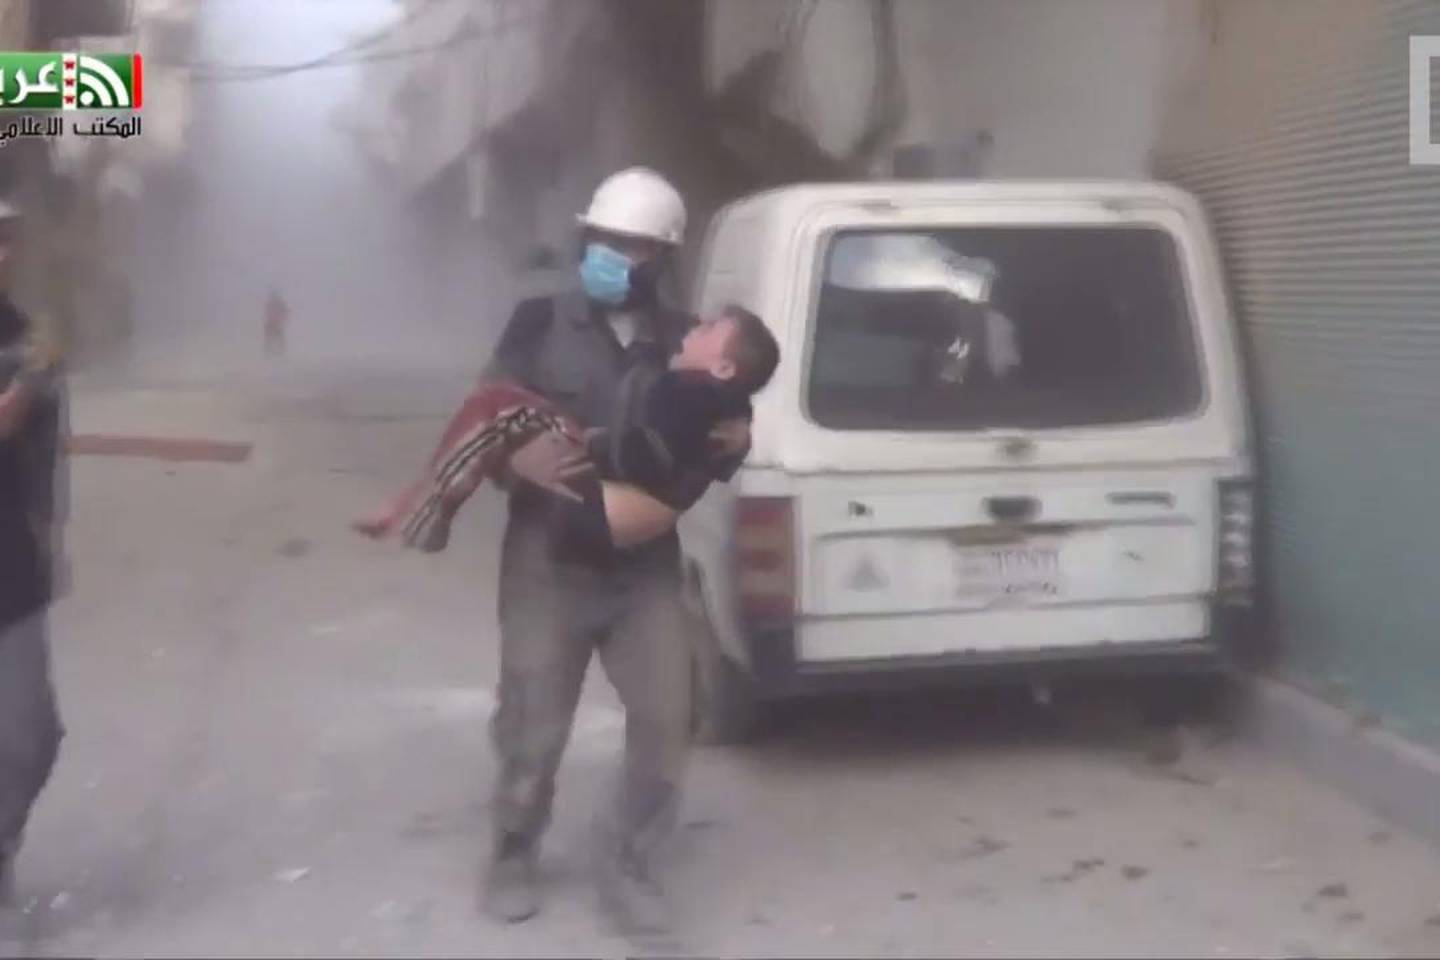 Syria's Eastern Ghouta "hell on earth" for its residents